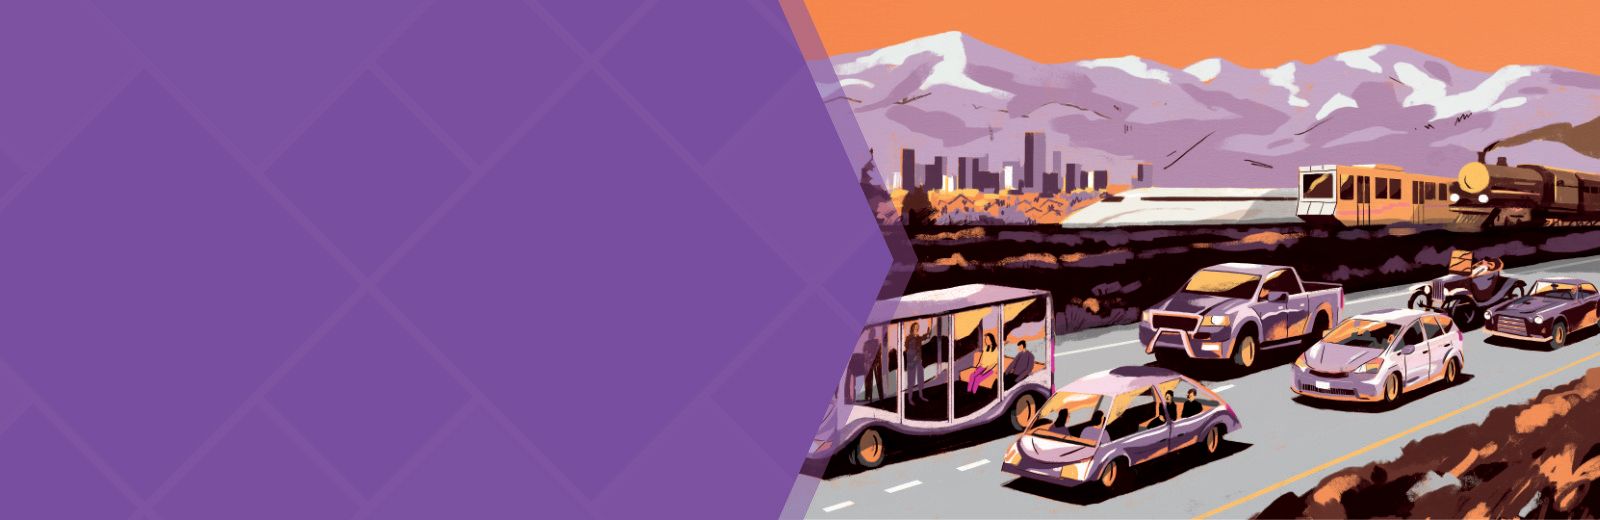 Illustration of vehicles with mountains and city skyline in background